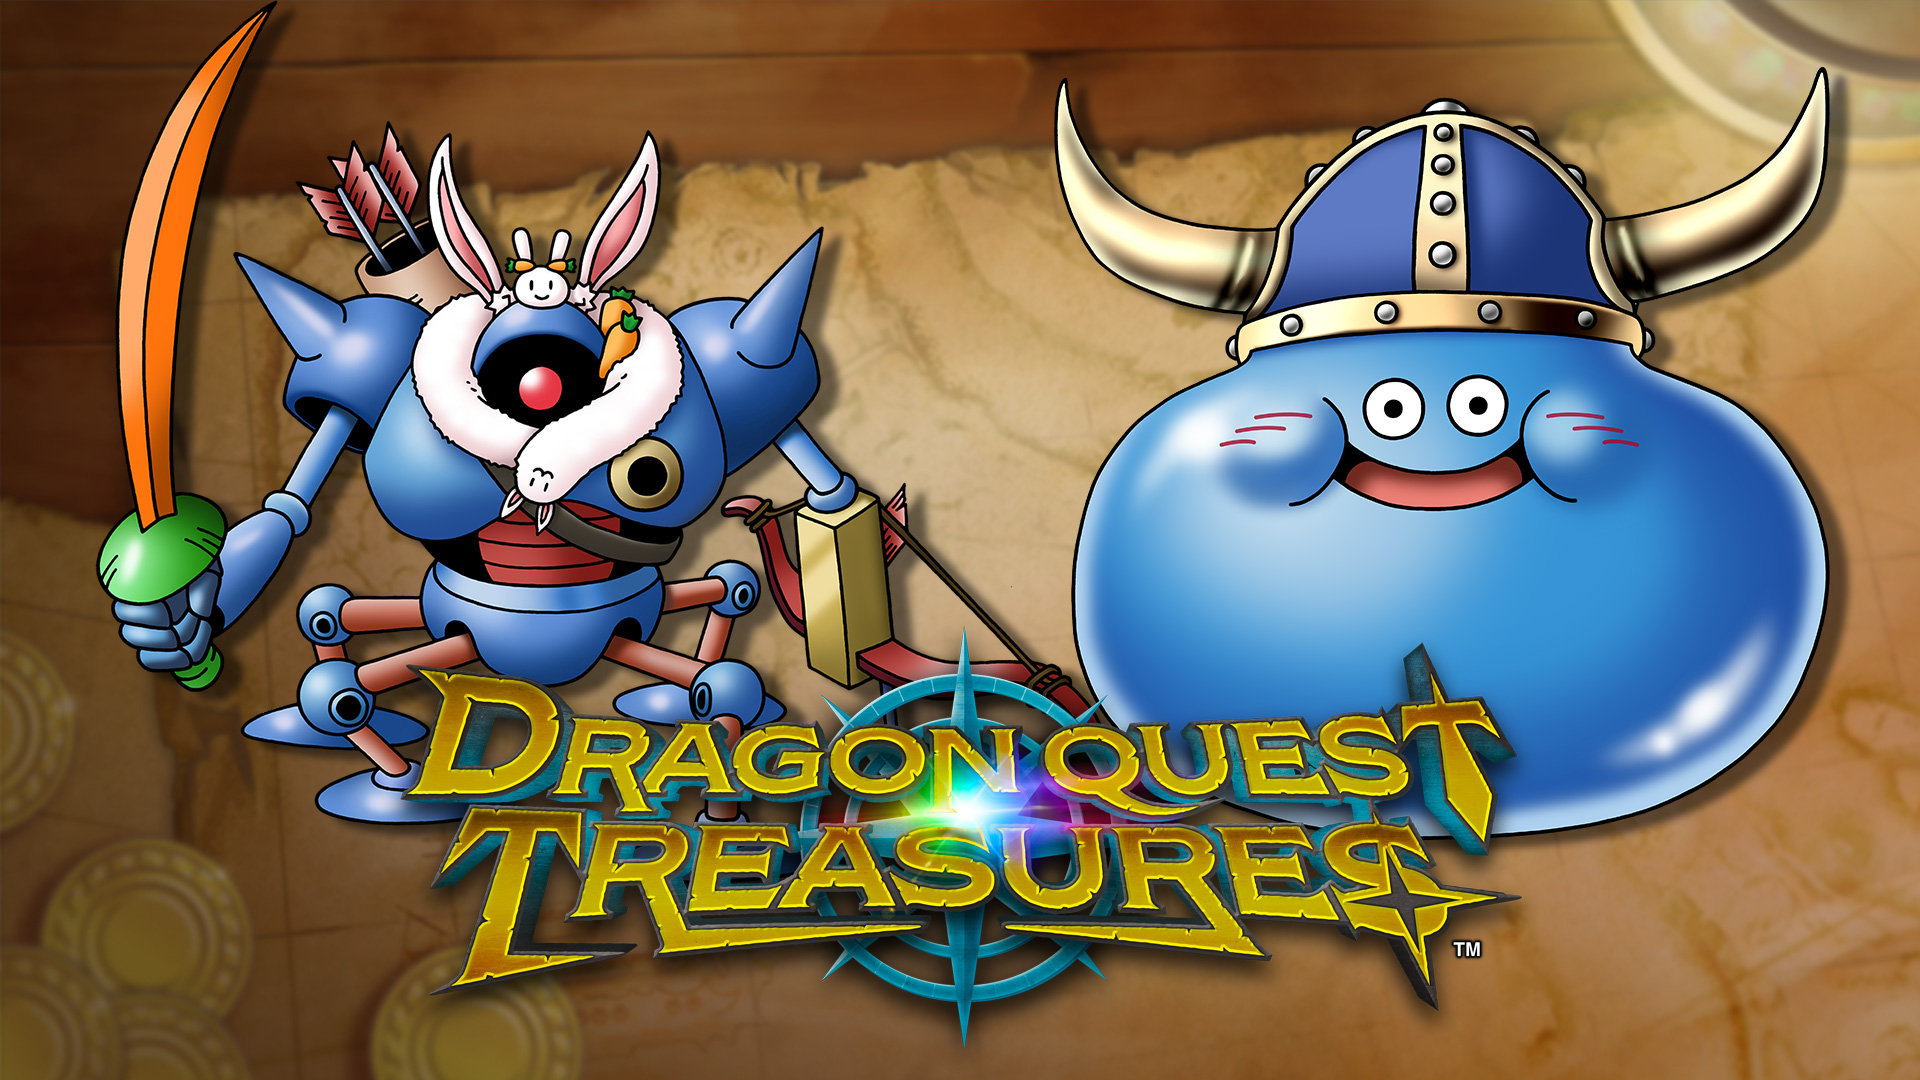 DRAGON QUEST TREASURERS Special monsters which could be obtained by gift code have appeared!